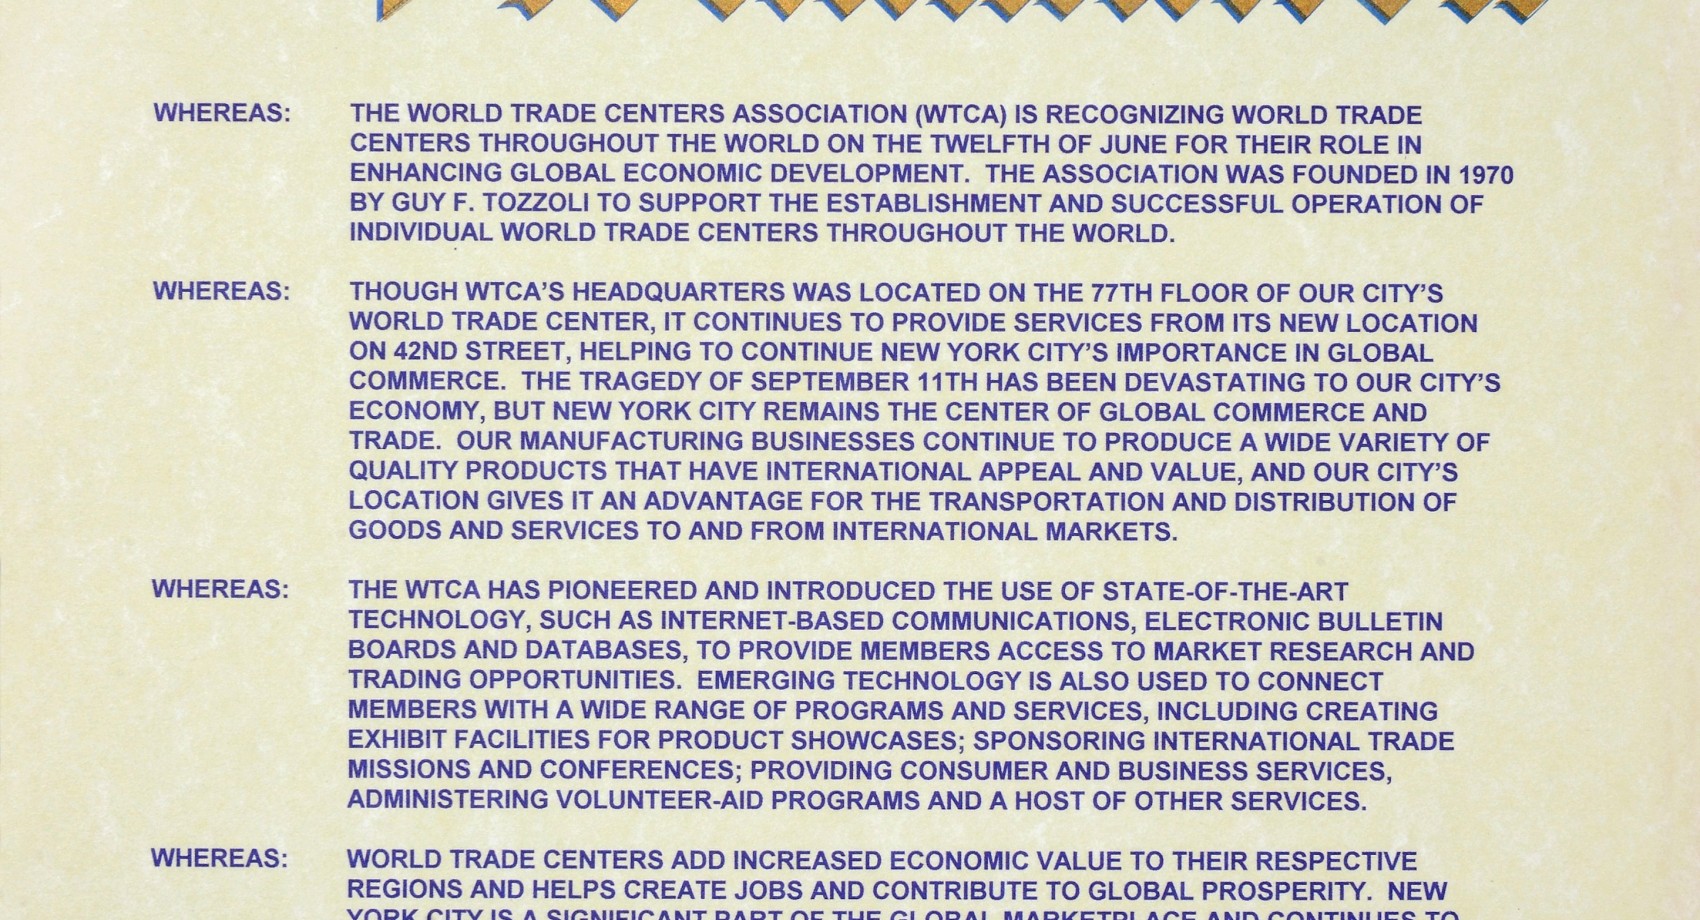 WTCA Day Proclamation - June 12, 2002